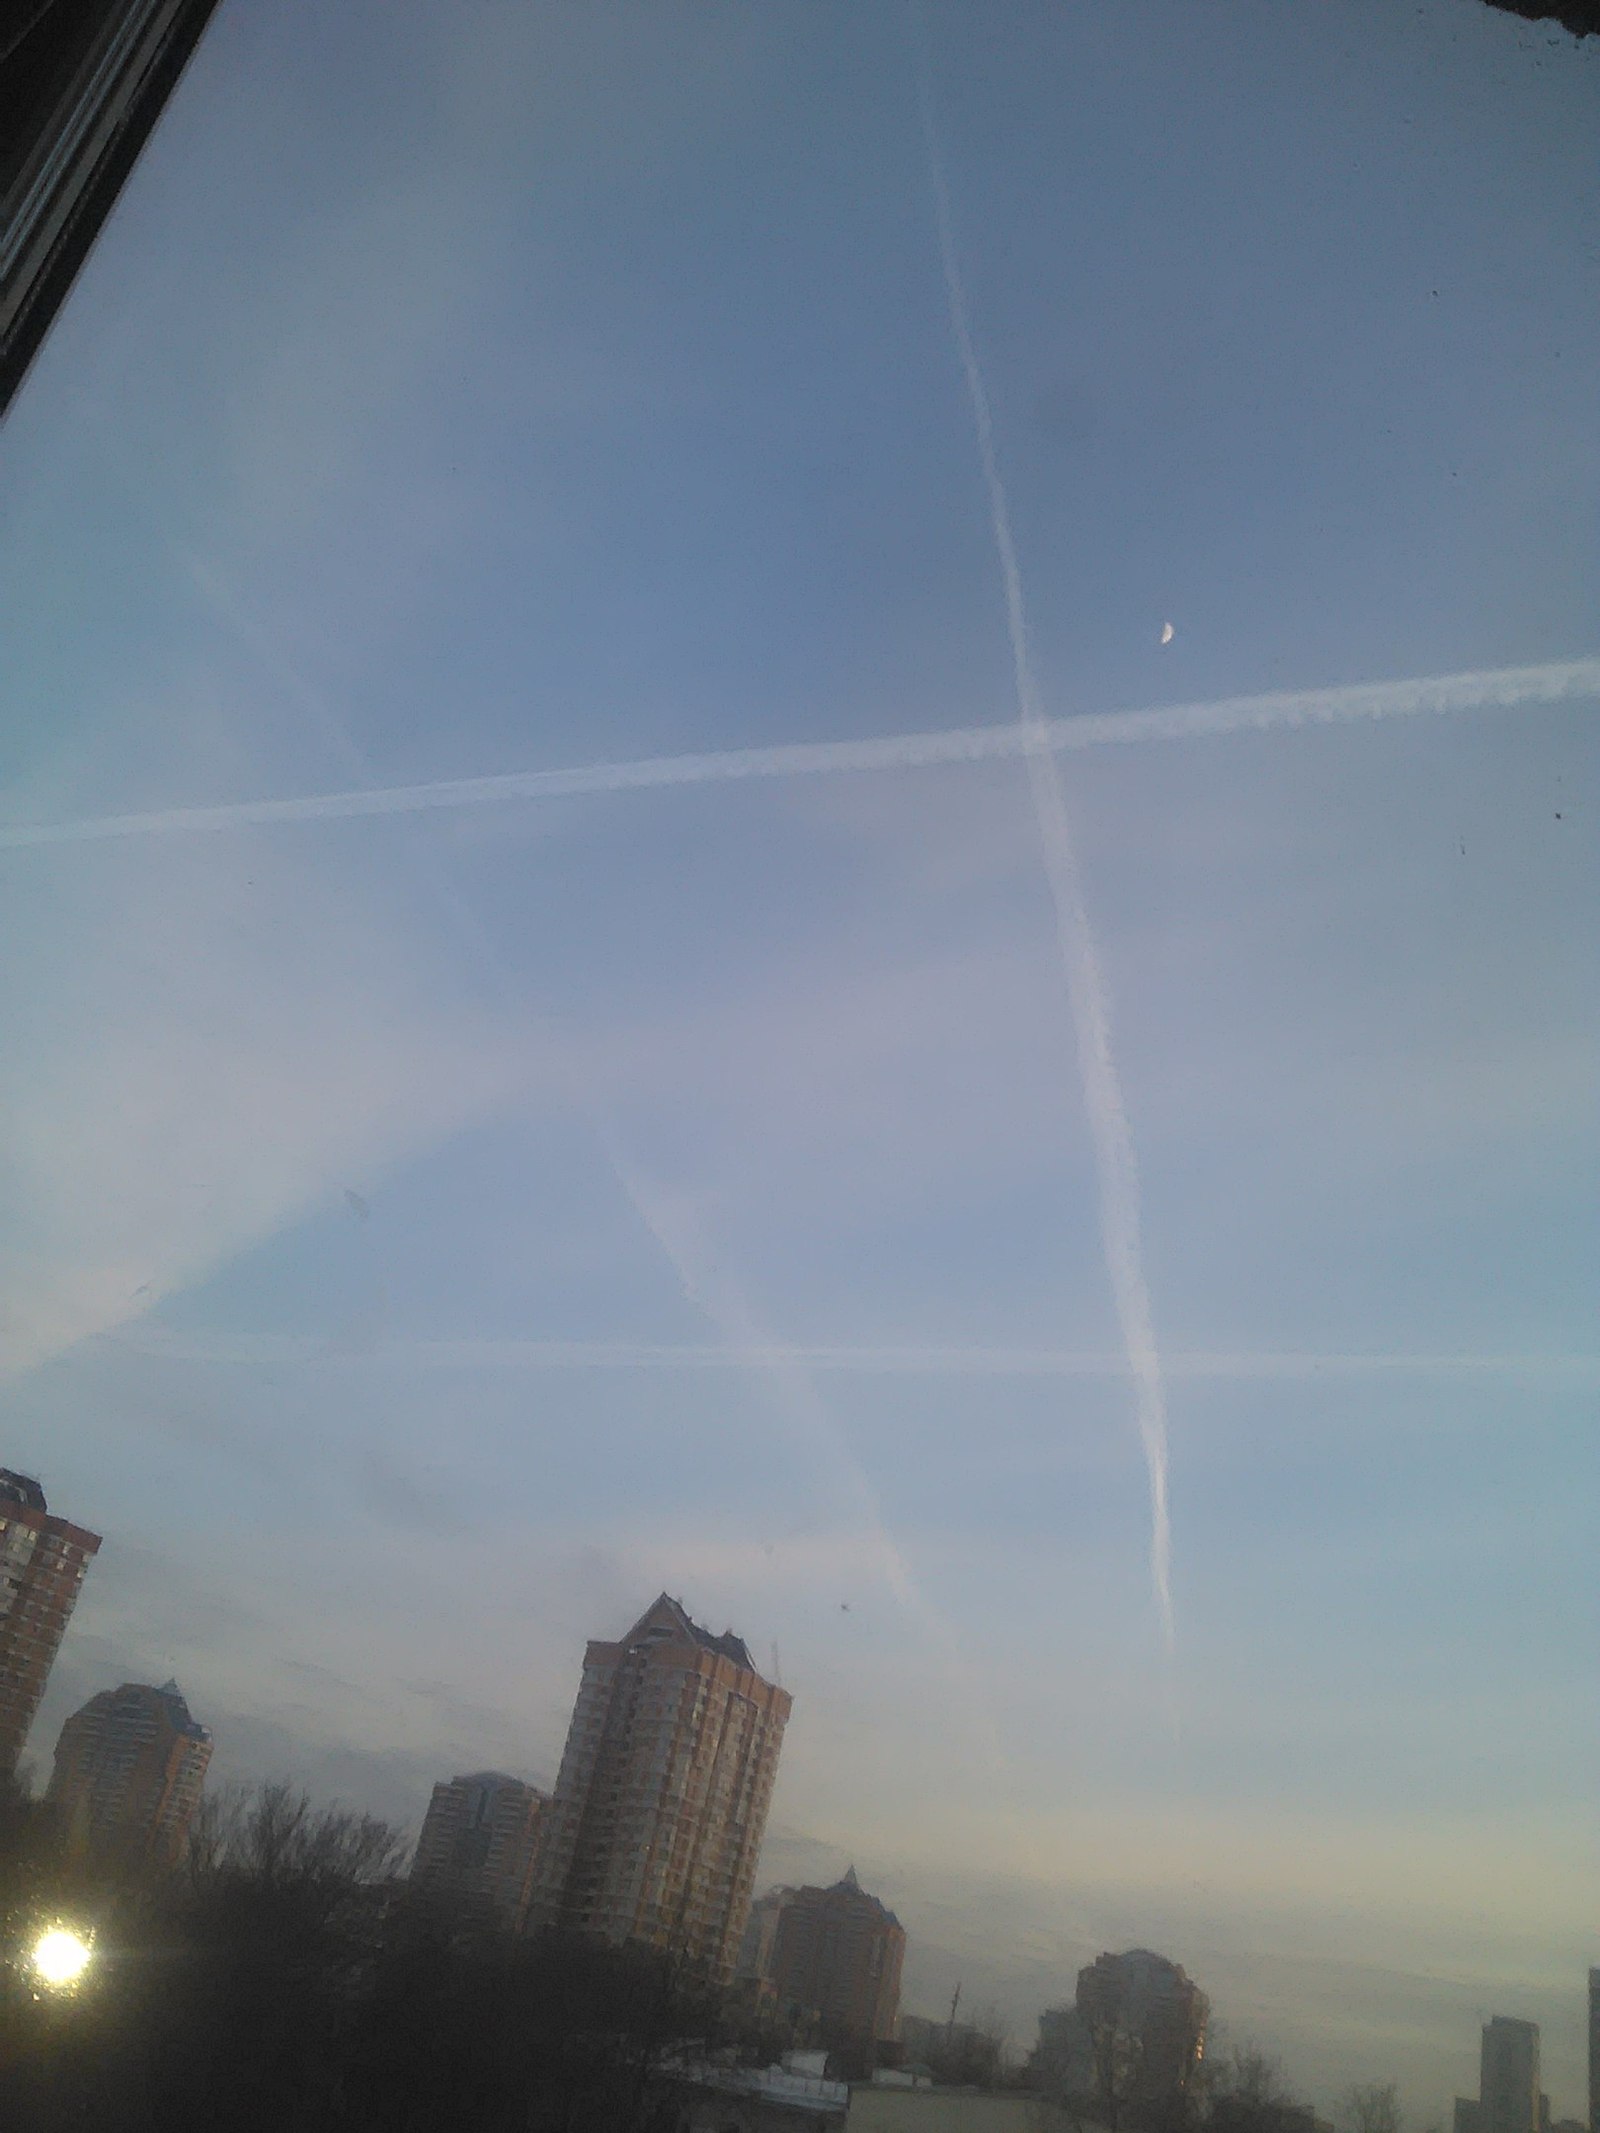 Campaign, a noble game of tic-tac-toe is planned ... - My, Sky, Condensation trail, Airplane